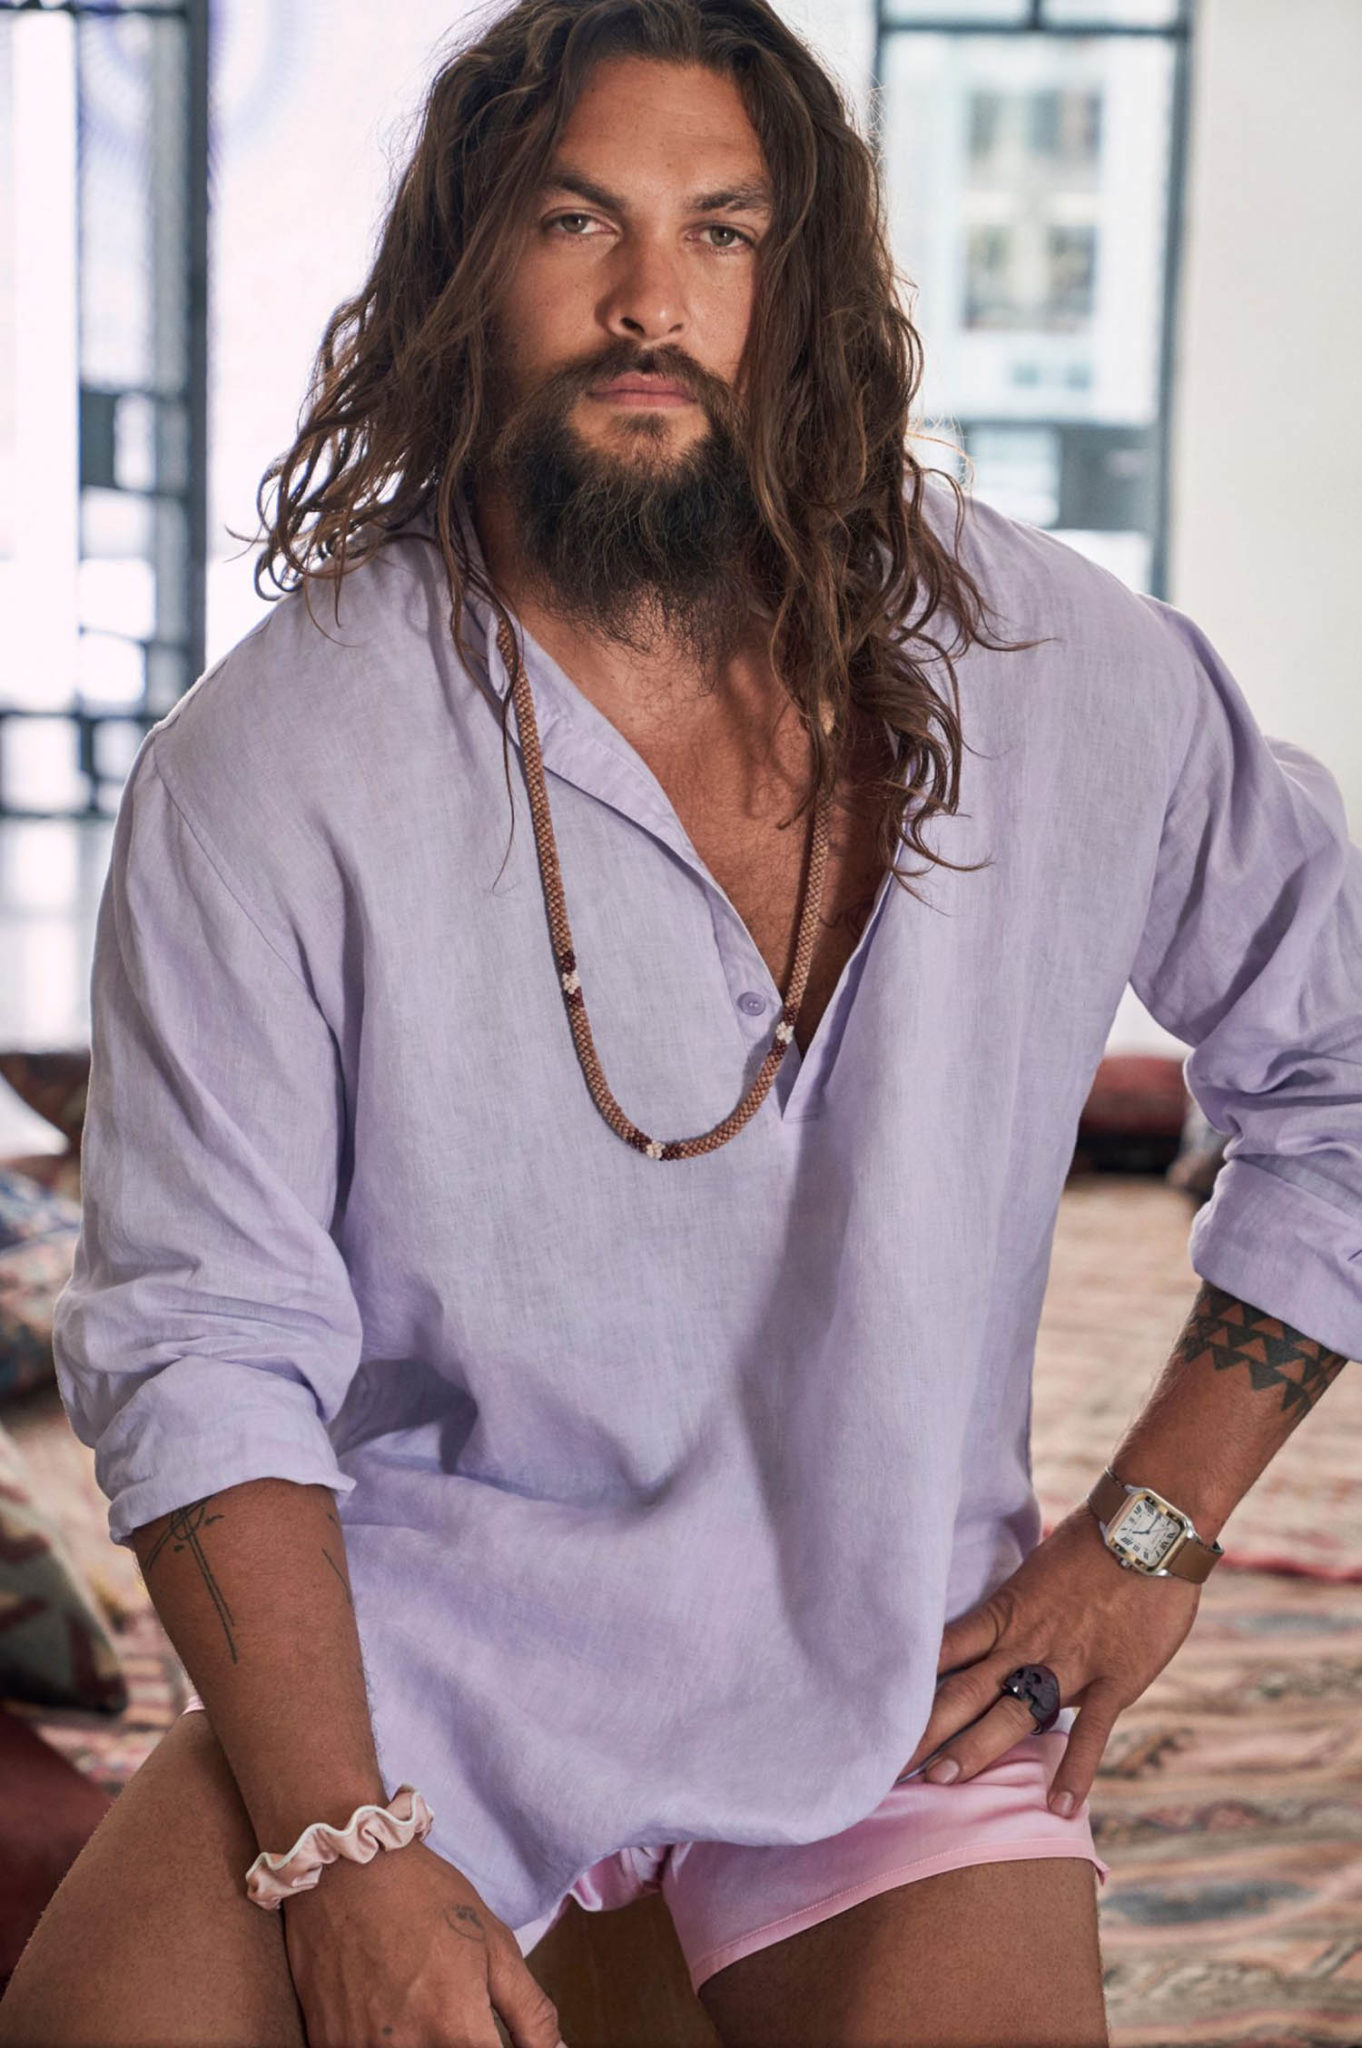 Jason-Momoa-by-Carter-Smith-for-InStyle-US-December-2020-1-1362x2048.jpg